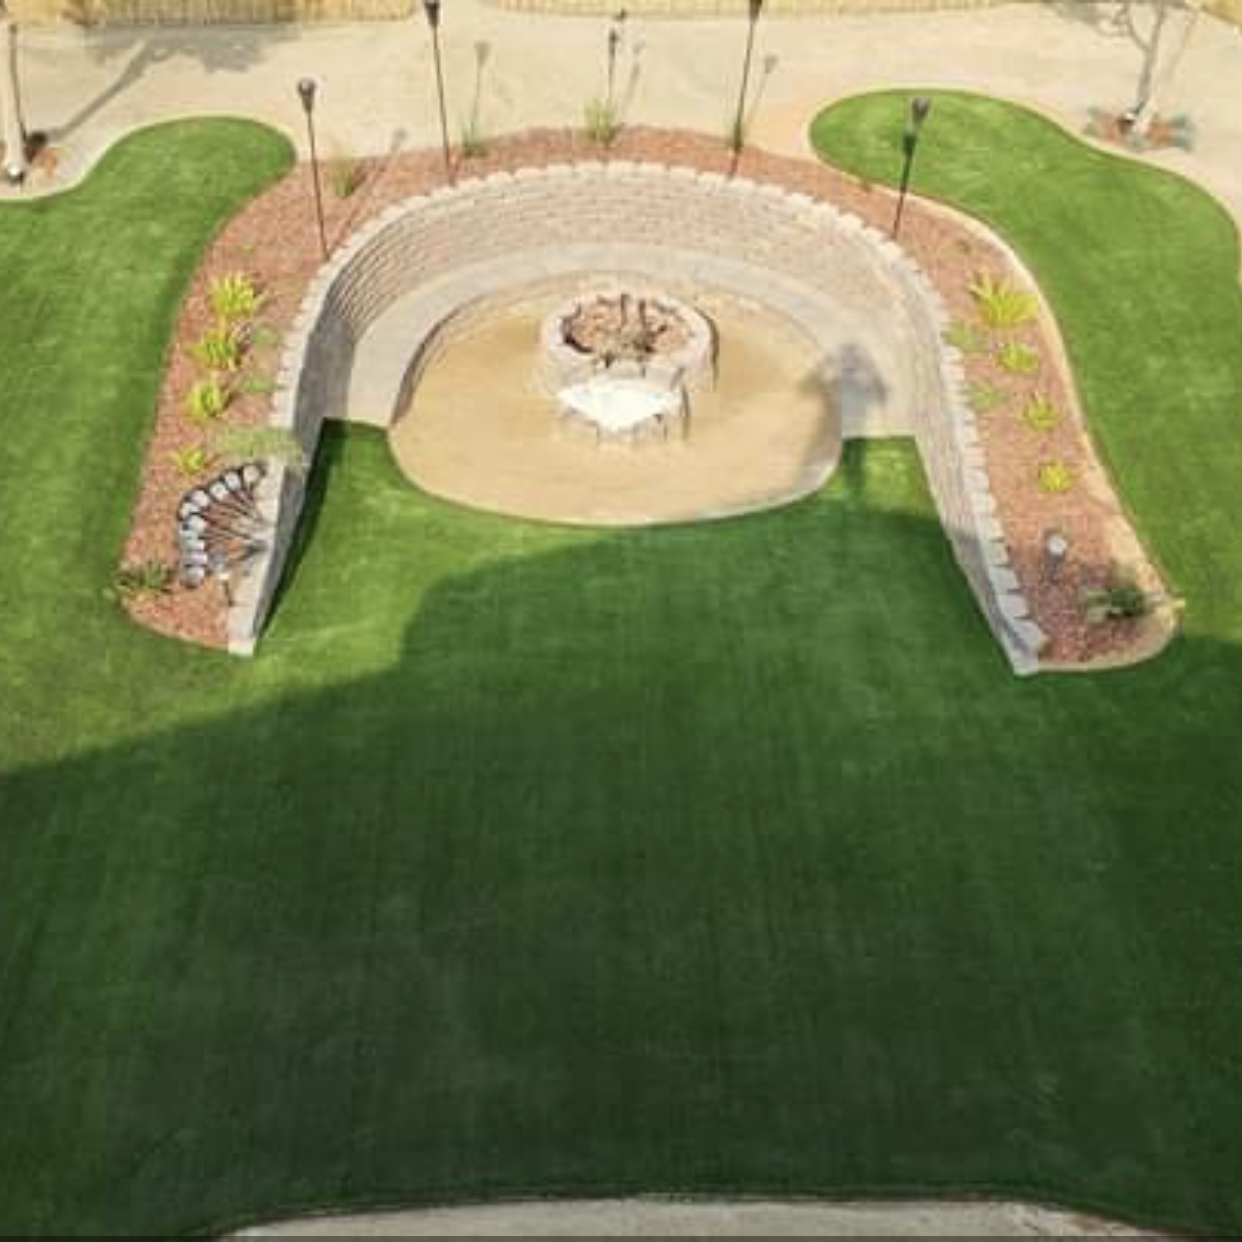 Cool Blue Hollow Lime artificial turf,synthetic turf,artificial turf installation,how to install artificial turf,used artificial turf,fake grass for yard,backyard turf,turf backyard,turf yard,fake grass for backyard